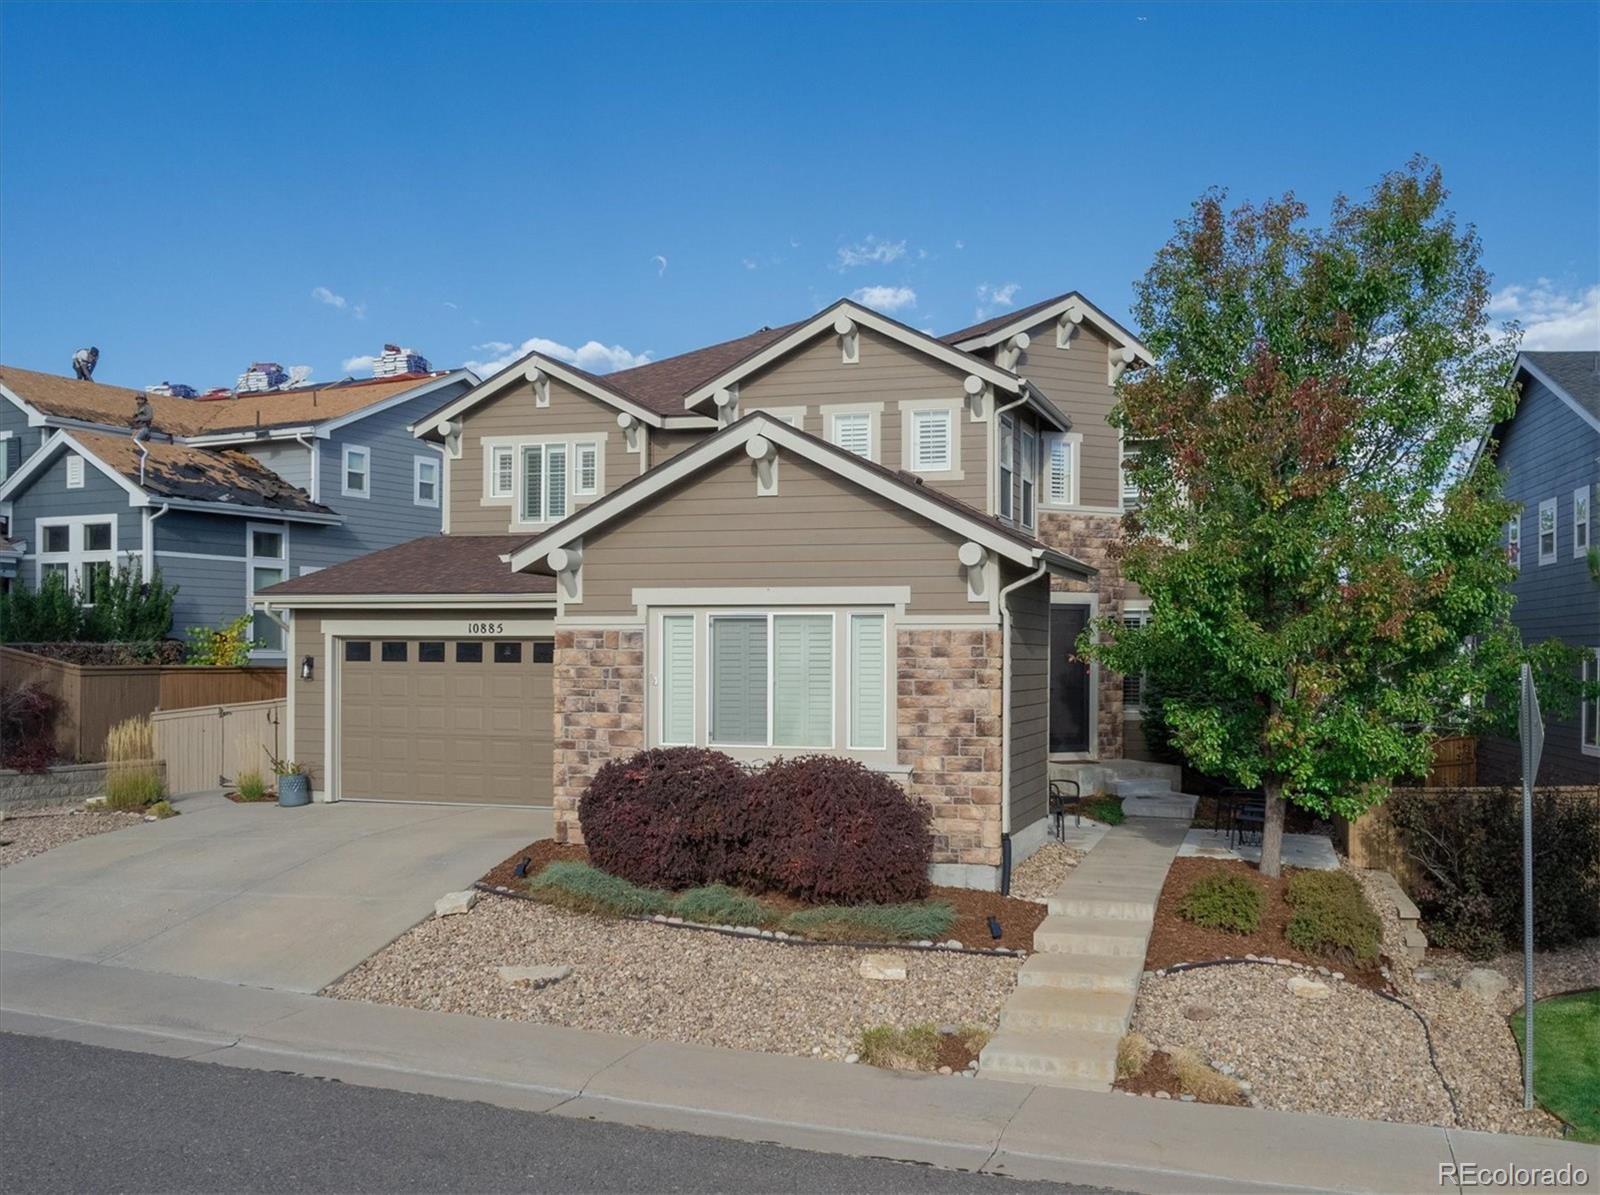 Report Image for 10885  Huntwick Street,Highlands Ranch, Colorado